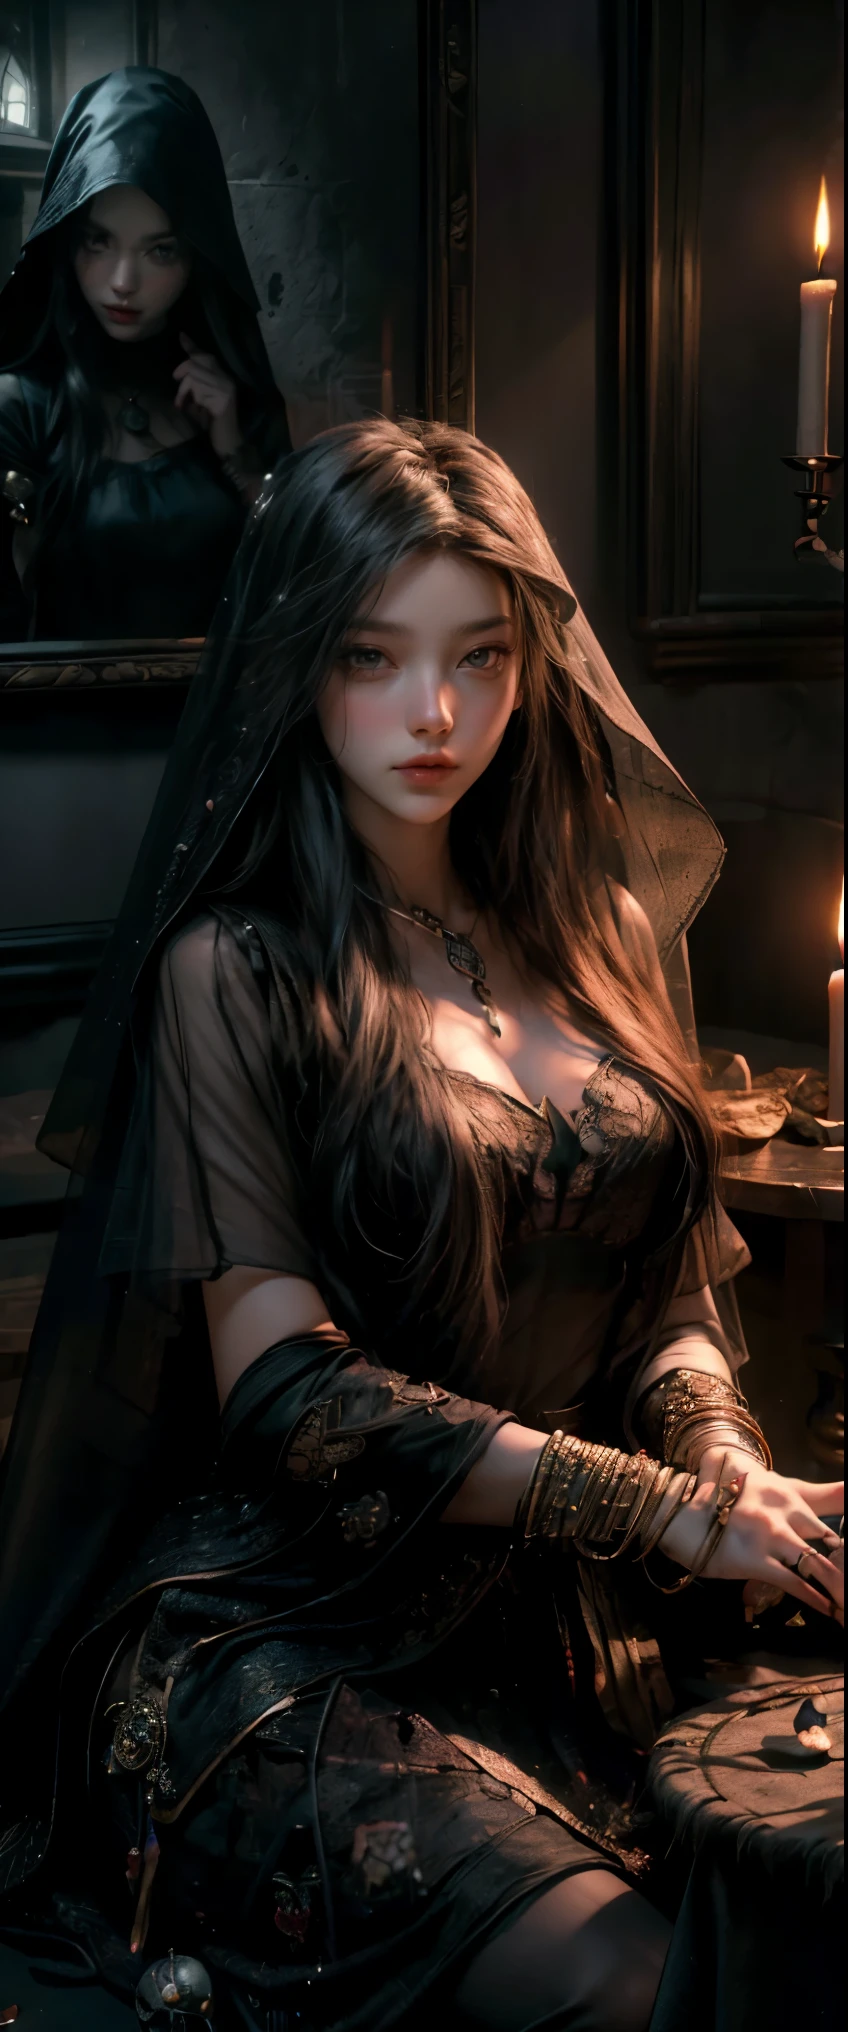 ((masterpiece, highest quality, Highest image quality, High resolution, photorealistic, Raw photo, 8K)), Tarot Cards, Tolkien, Middle Earth, ((Tarot cards laid out on the table:1.5)), (Fortune teller whose face is hidden by a veil:1.5), 8k, highly detailed, hyperrealistic, cinematic lighting, ambient lighting, Tarot cards laid out on the table, earrings, choker, necklace, jewelry, rings, dark lipstick, dark makeup, circlet, sitting behind! a table, one! fortune teller orb on the table, one! skull on the table, candles, in a small dark medieval room, 